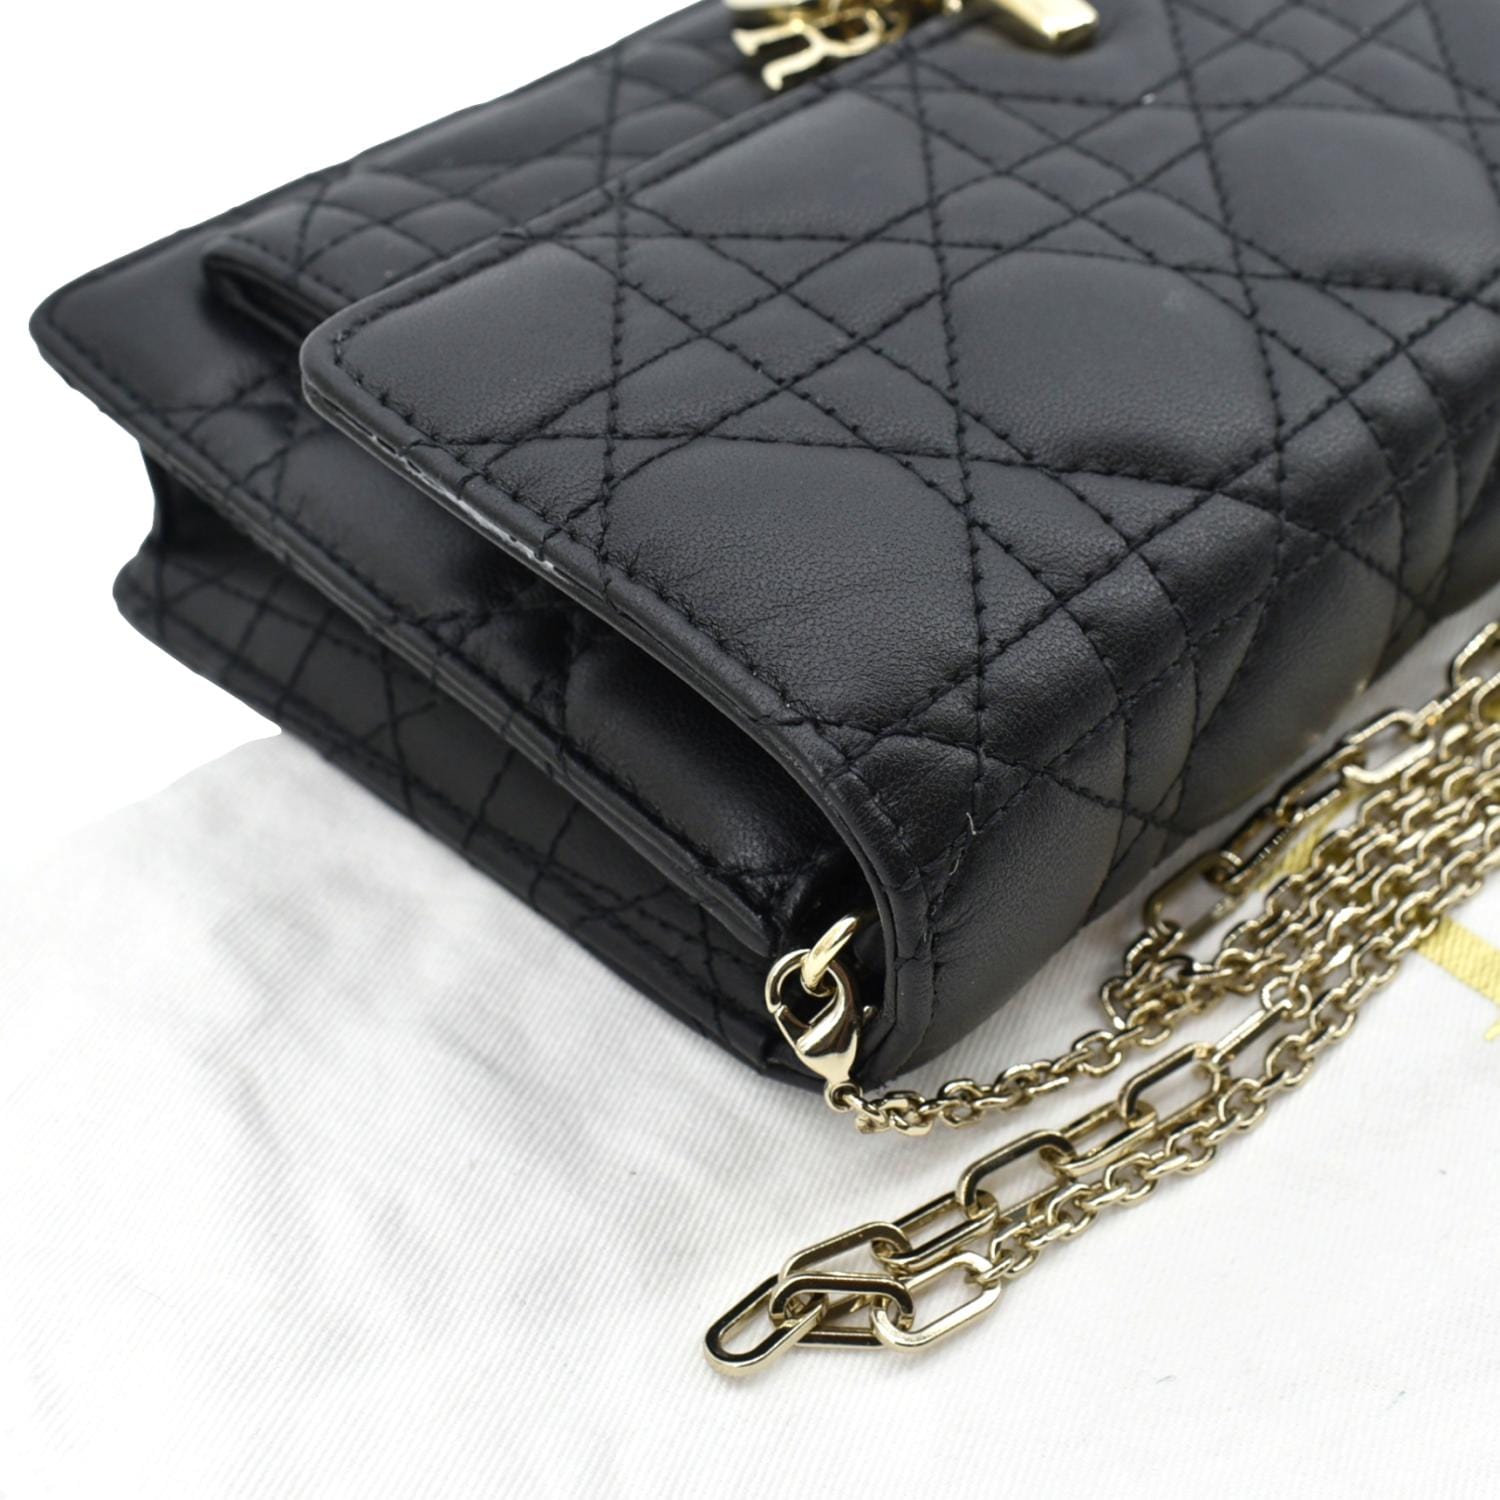 CHRISTIAN DIOR The Lady Dior Leather Chain Pouch Bag Black